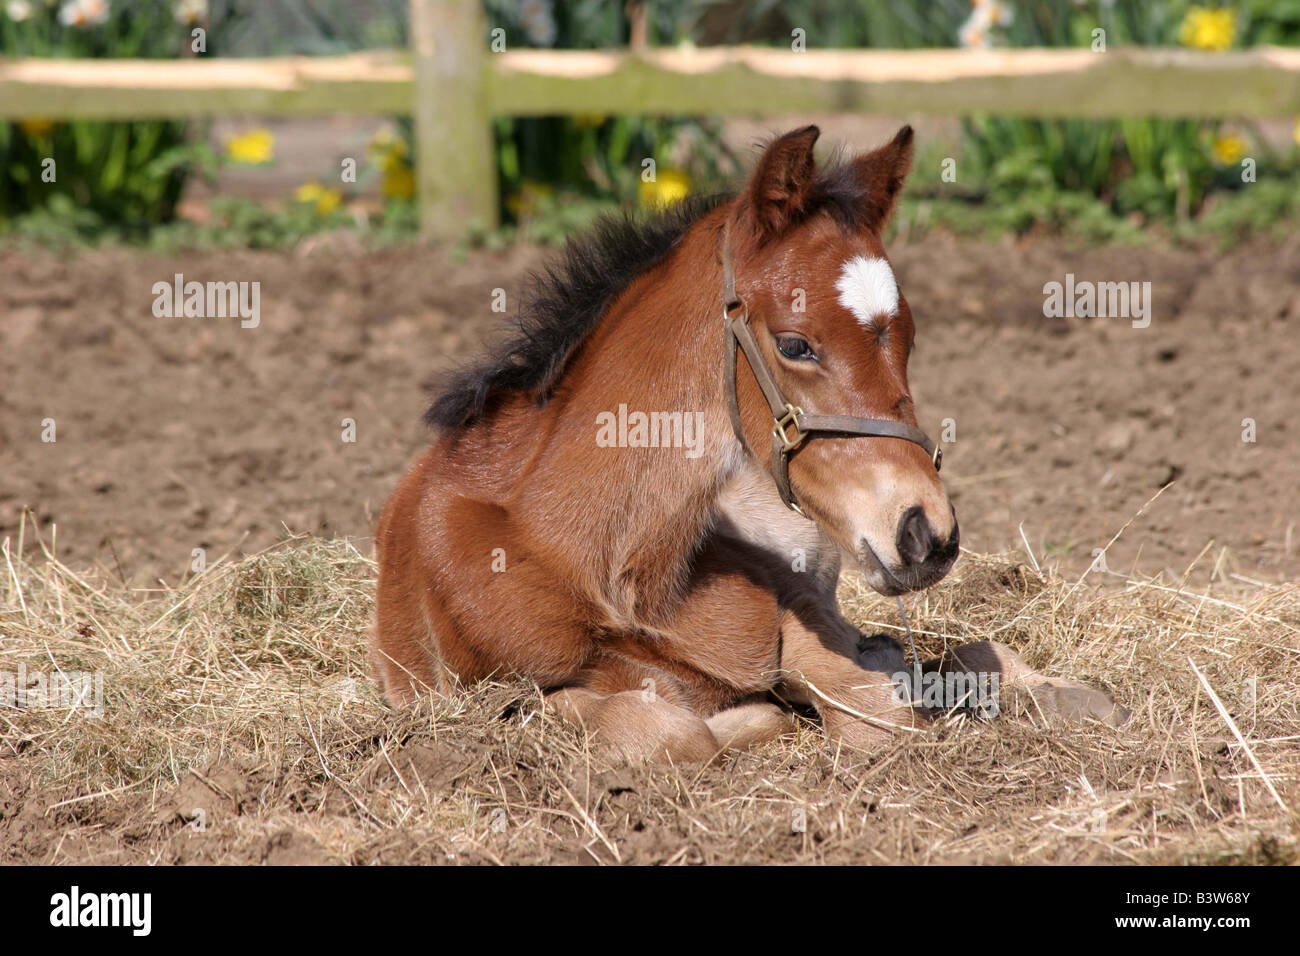 young Foal laying on straw in an open field Stock Photo